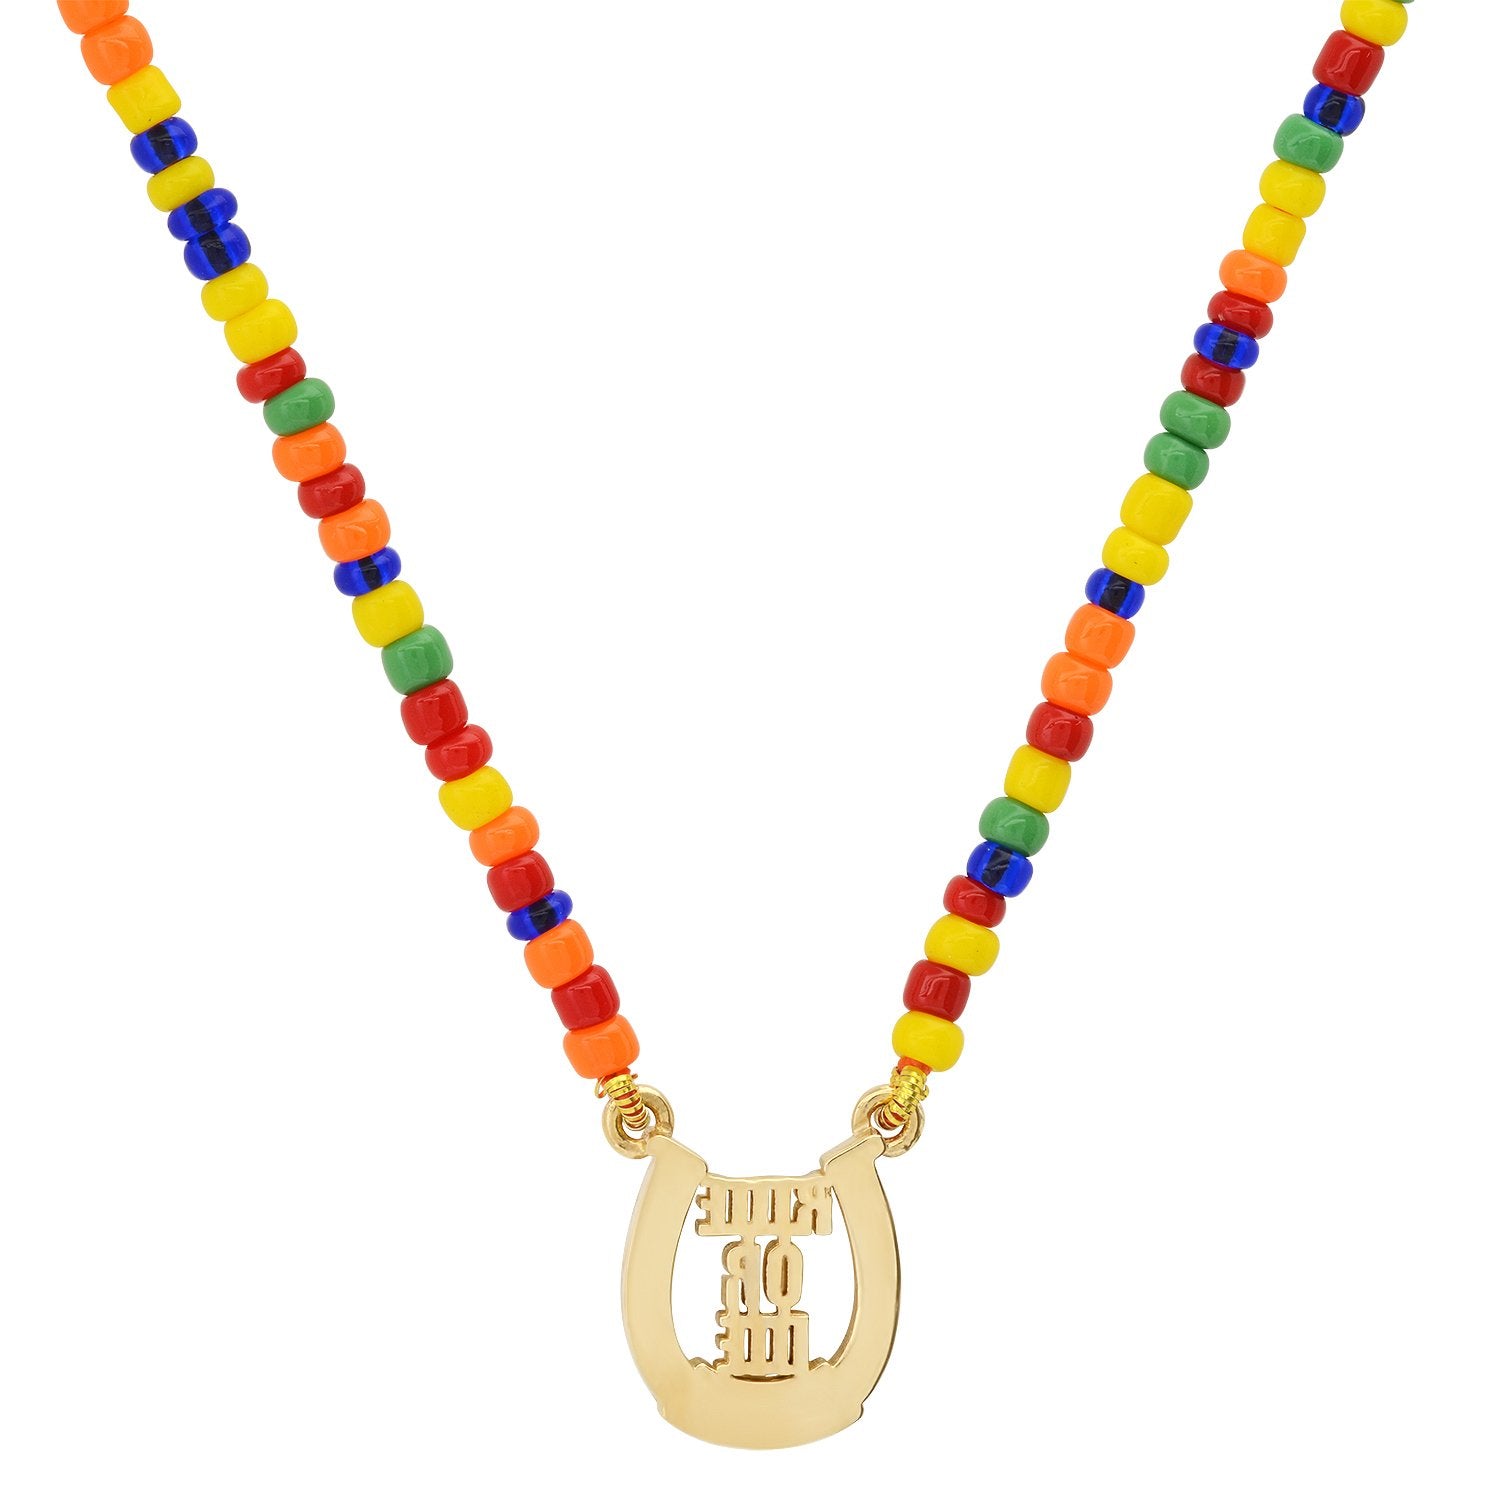 Mini Beaded Ride or Die Necklace